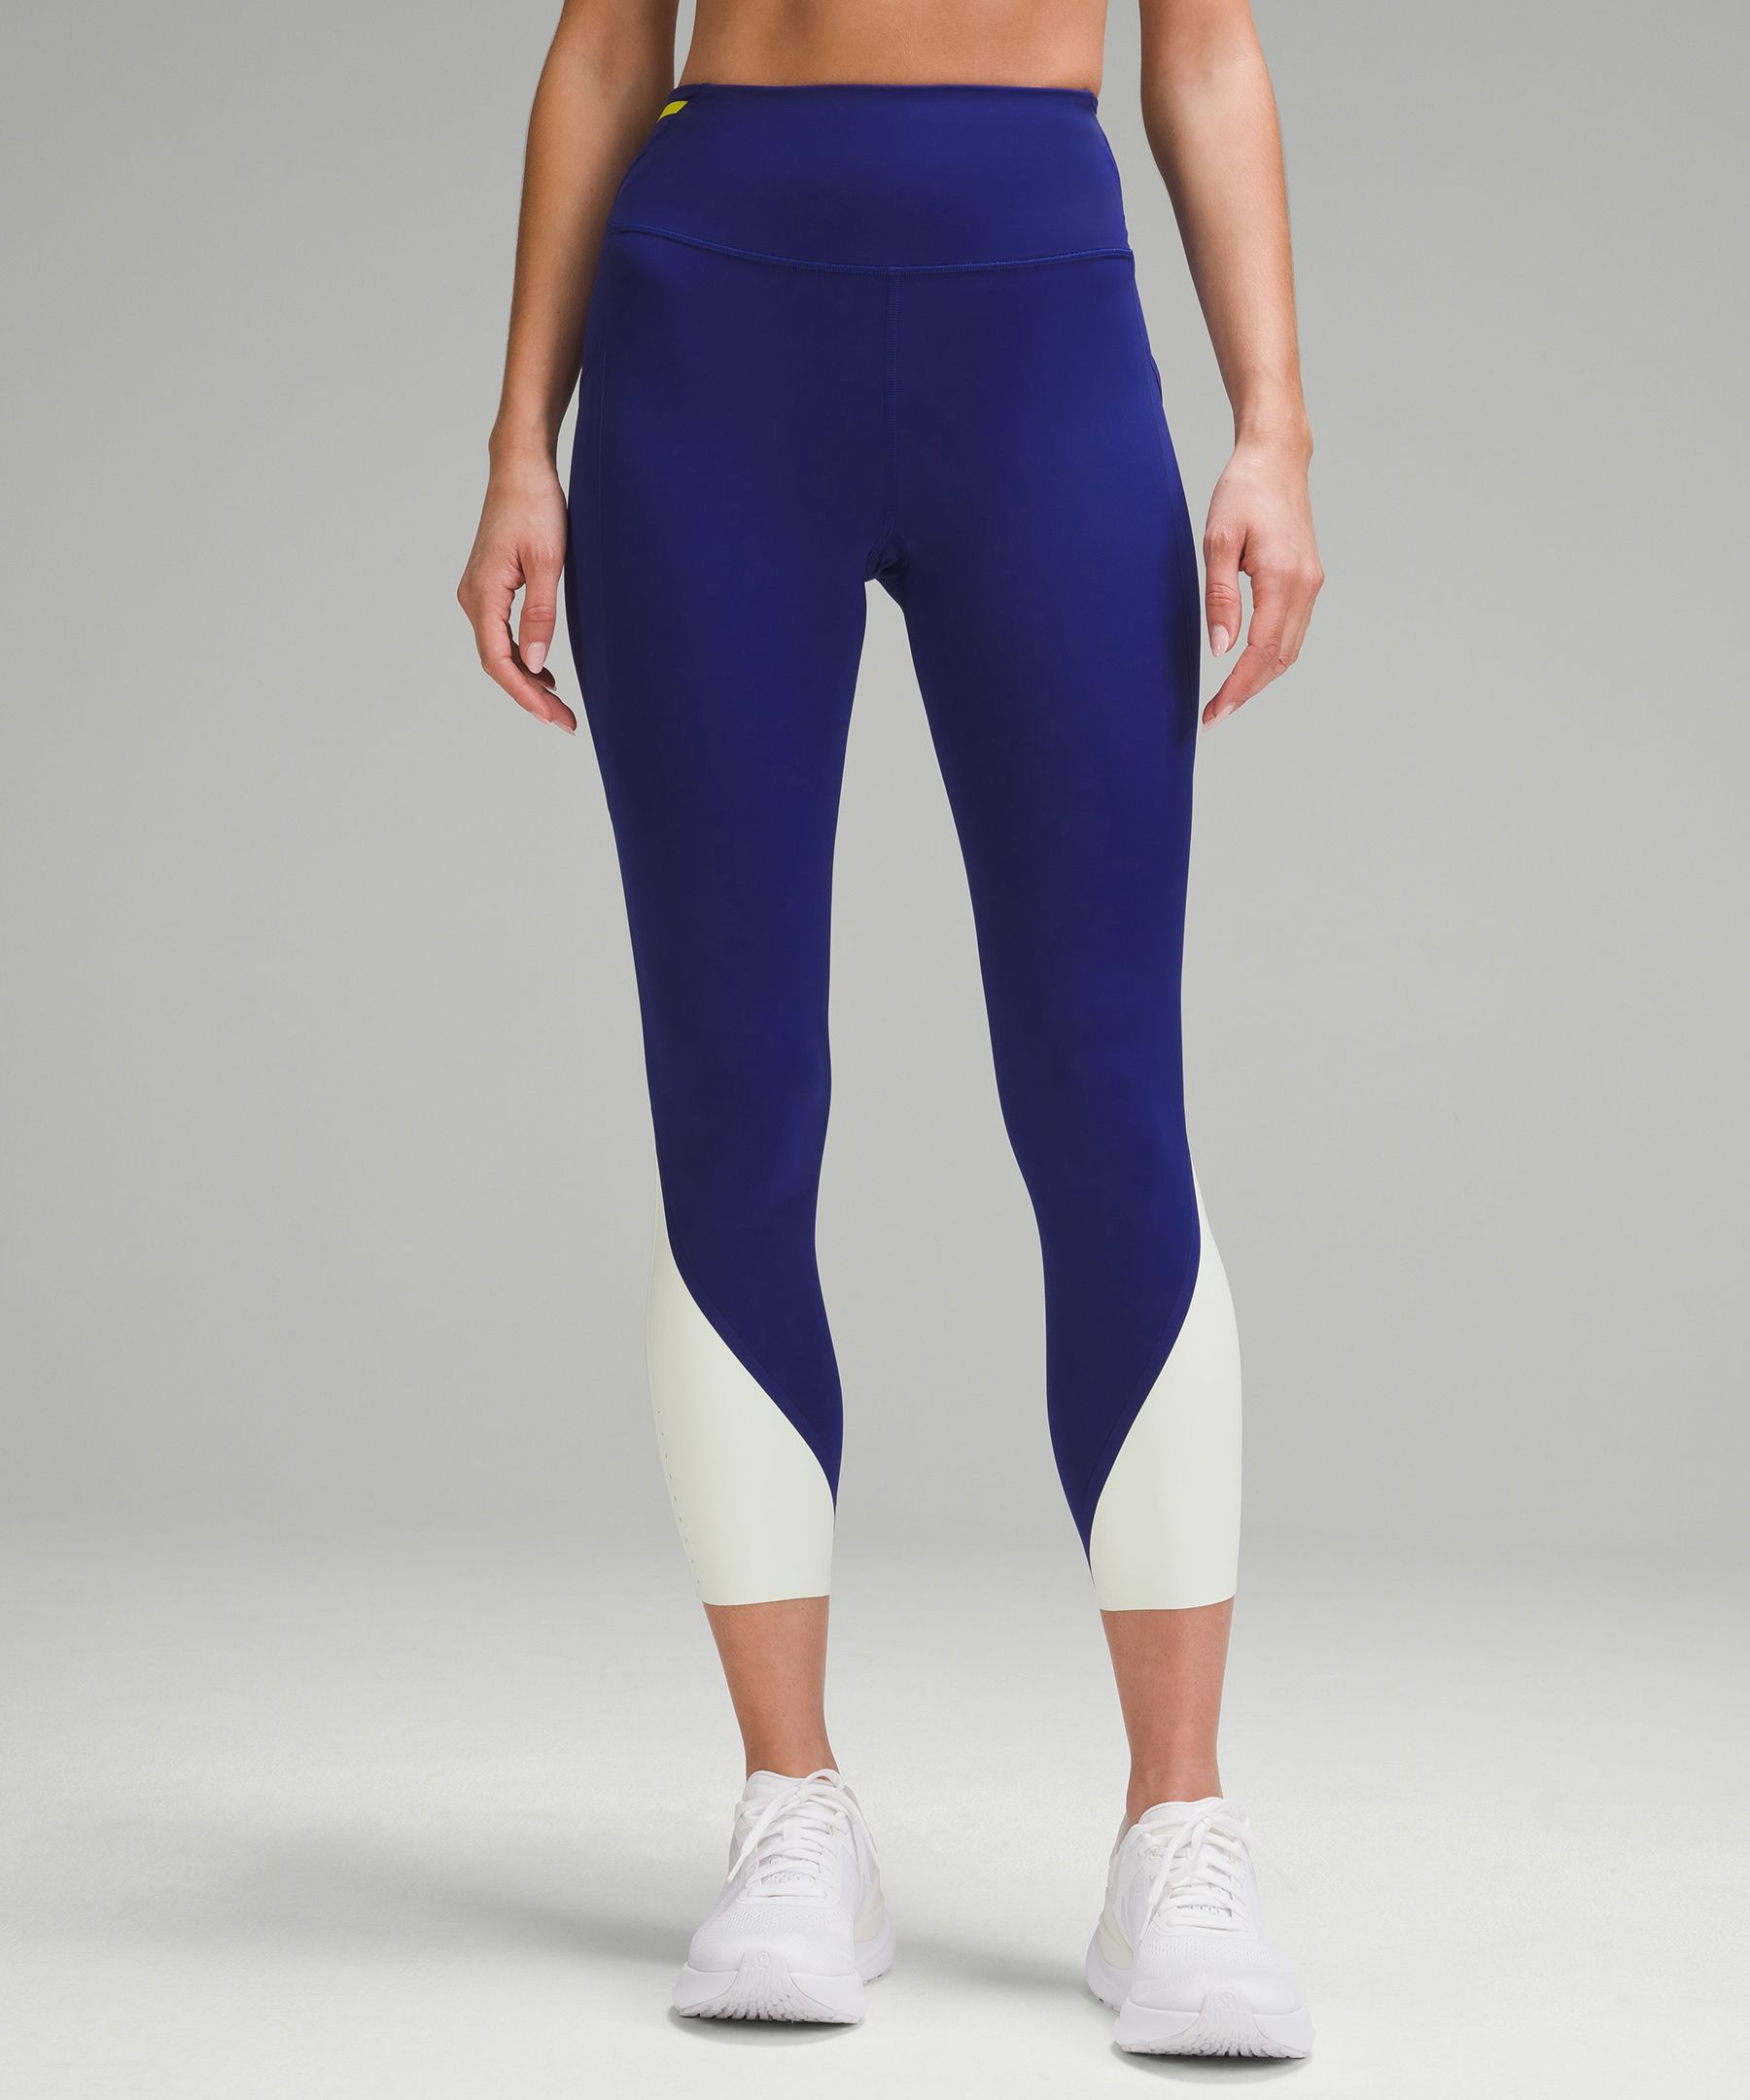 Discover the UK's hottest women's leggings to unleash your